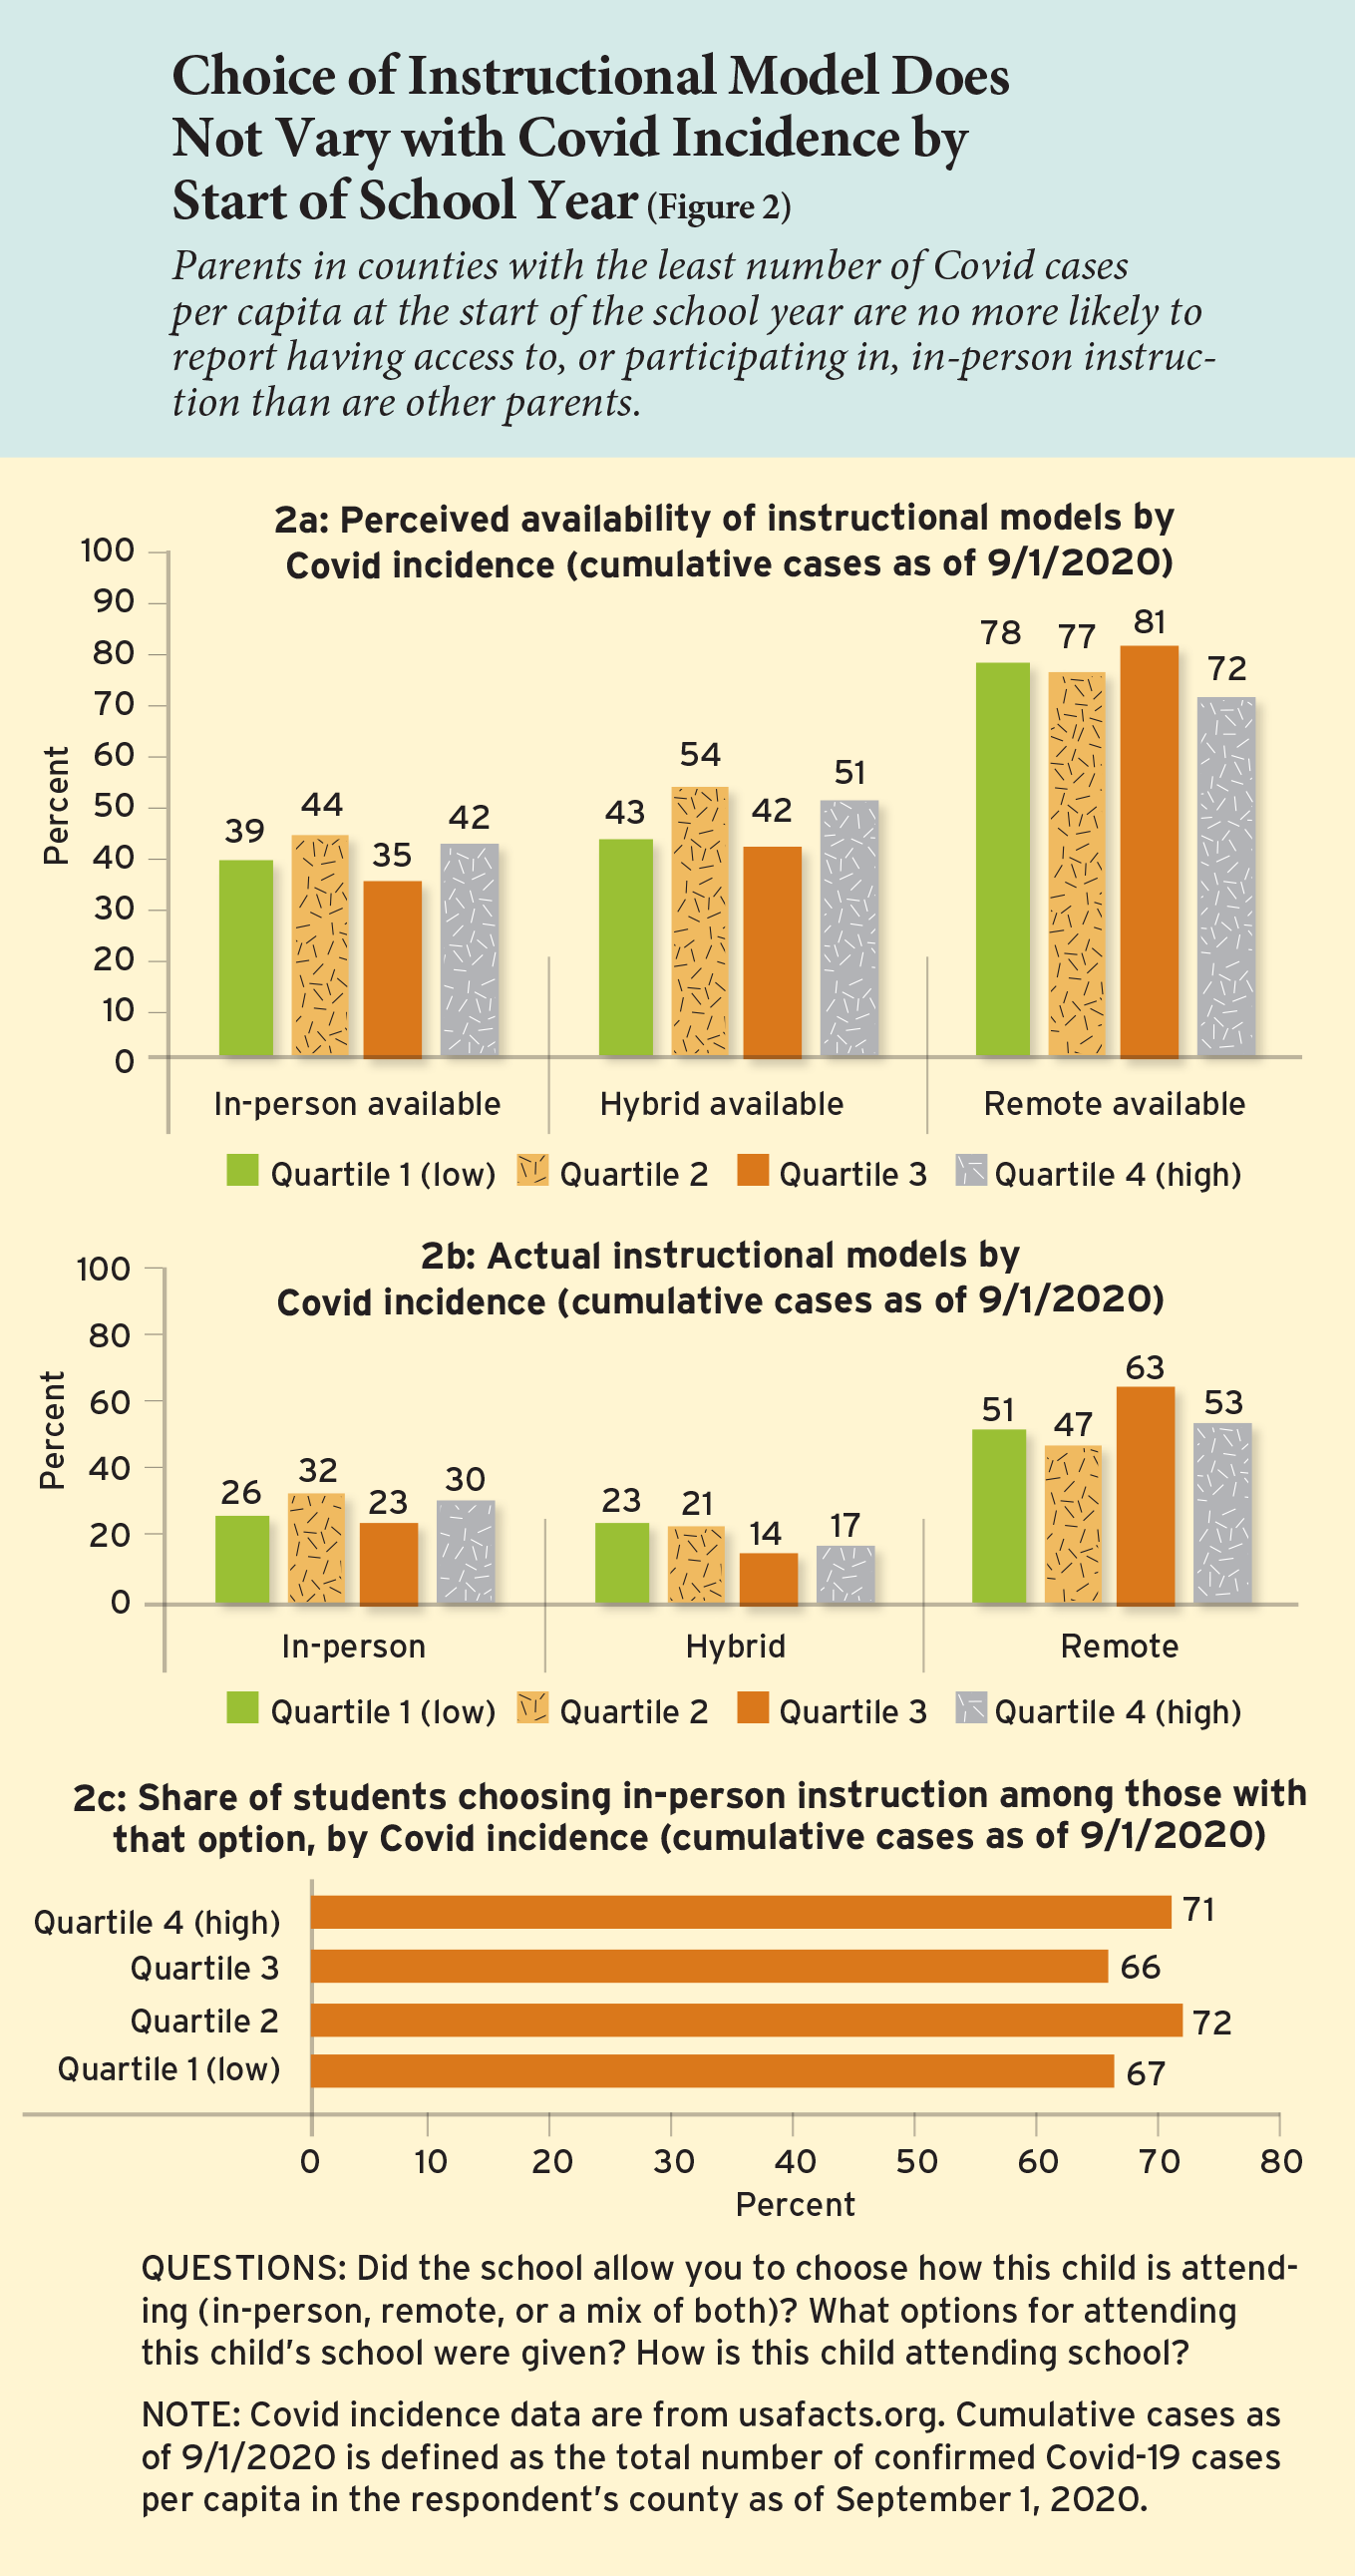 Choice of Instructional Model Does Not Vary with Covid Incidence by Start of School Year (Figure 2)